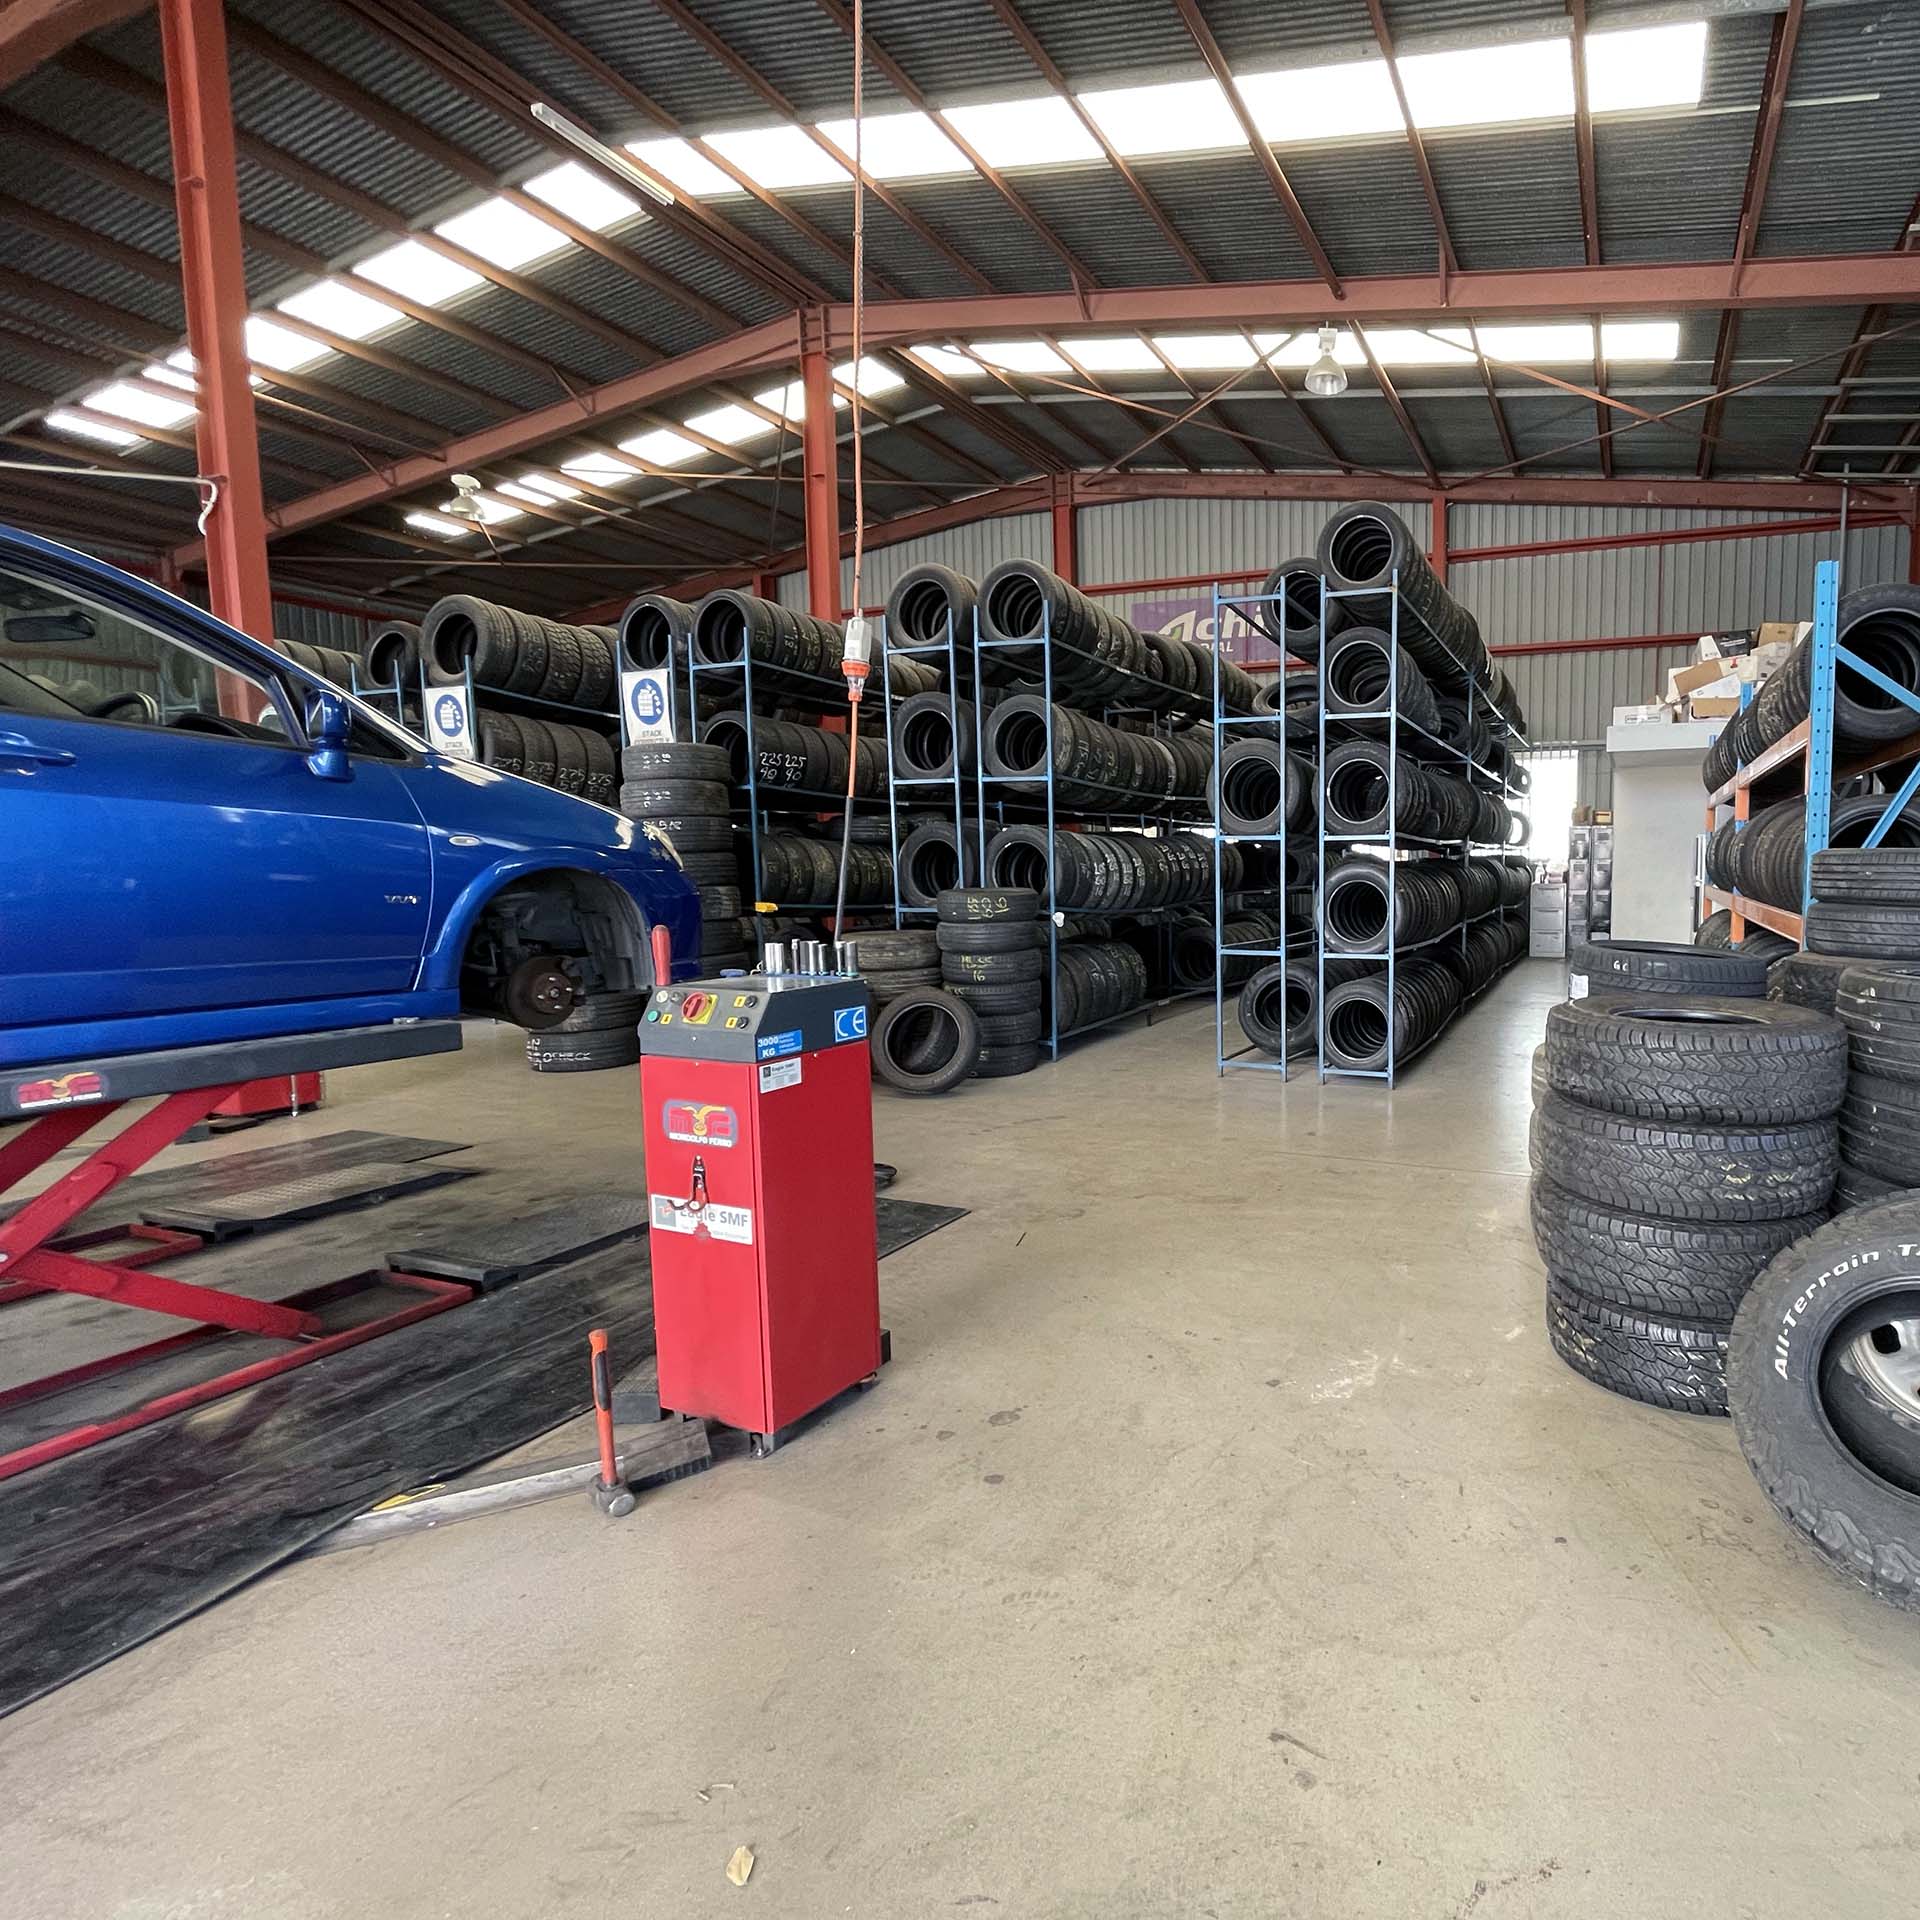 Interrior of the Branigans Southport tyre shop in the Gold Coast.